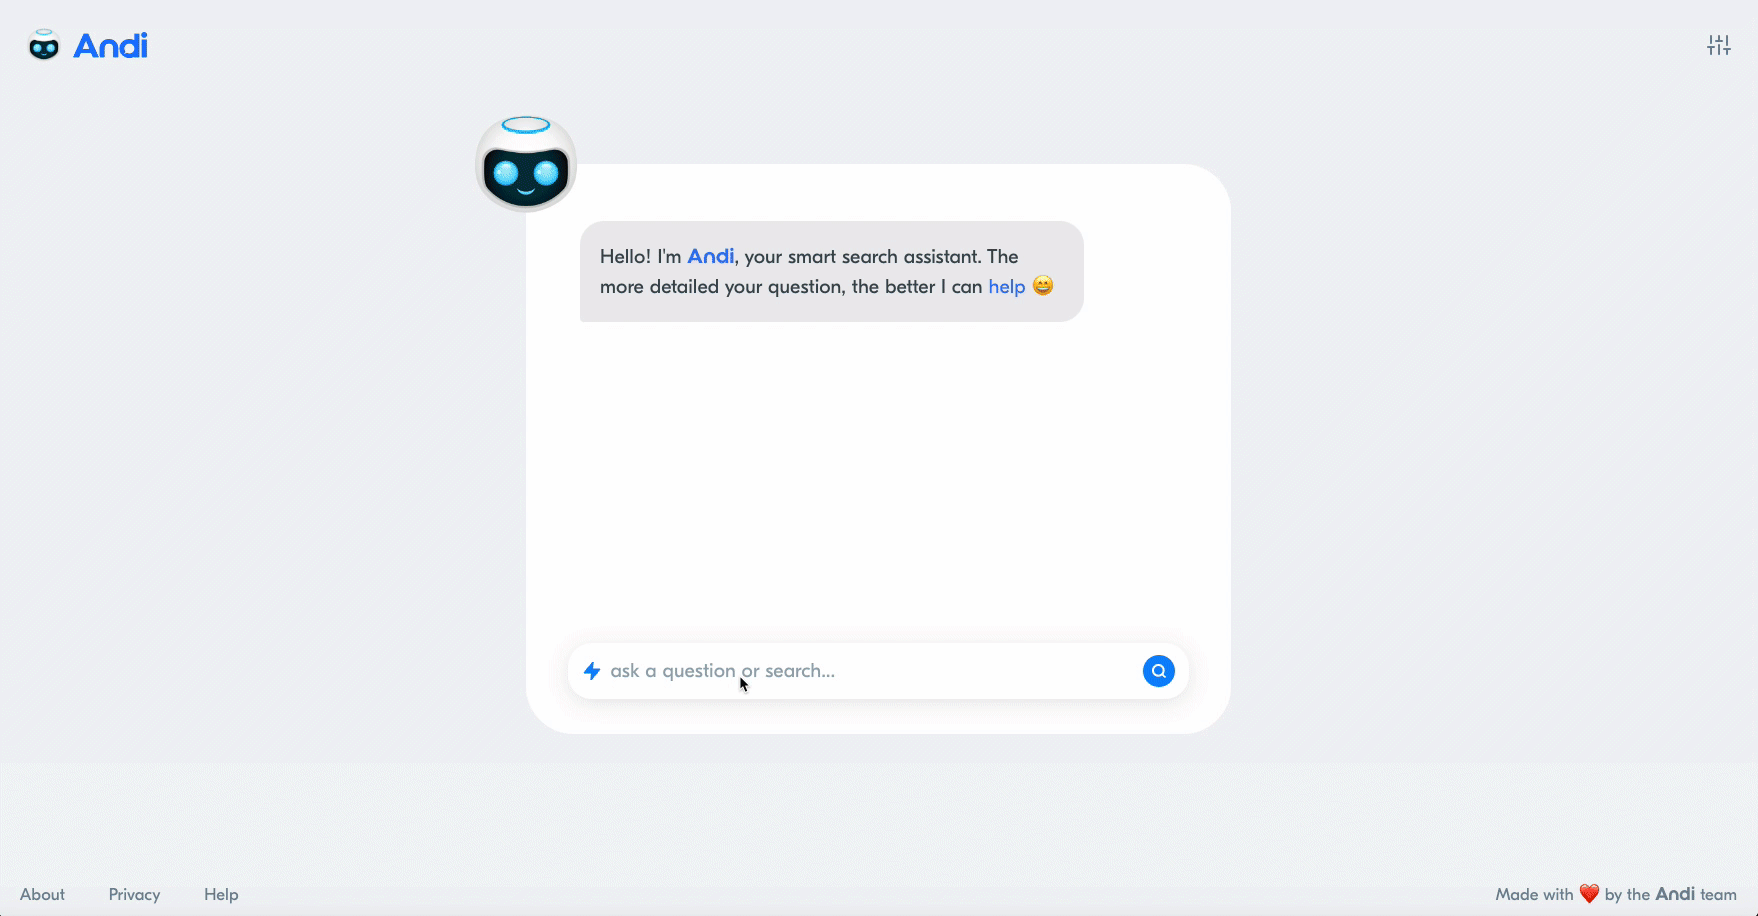 Andi is an AI search assistant